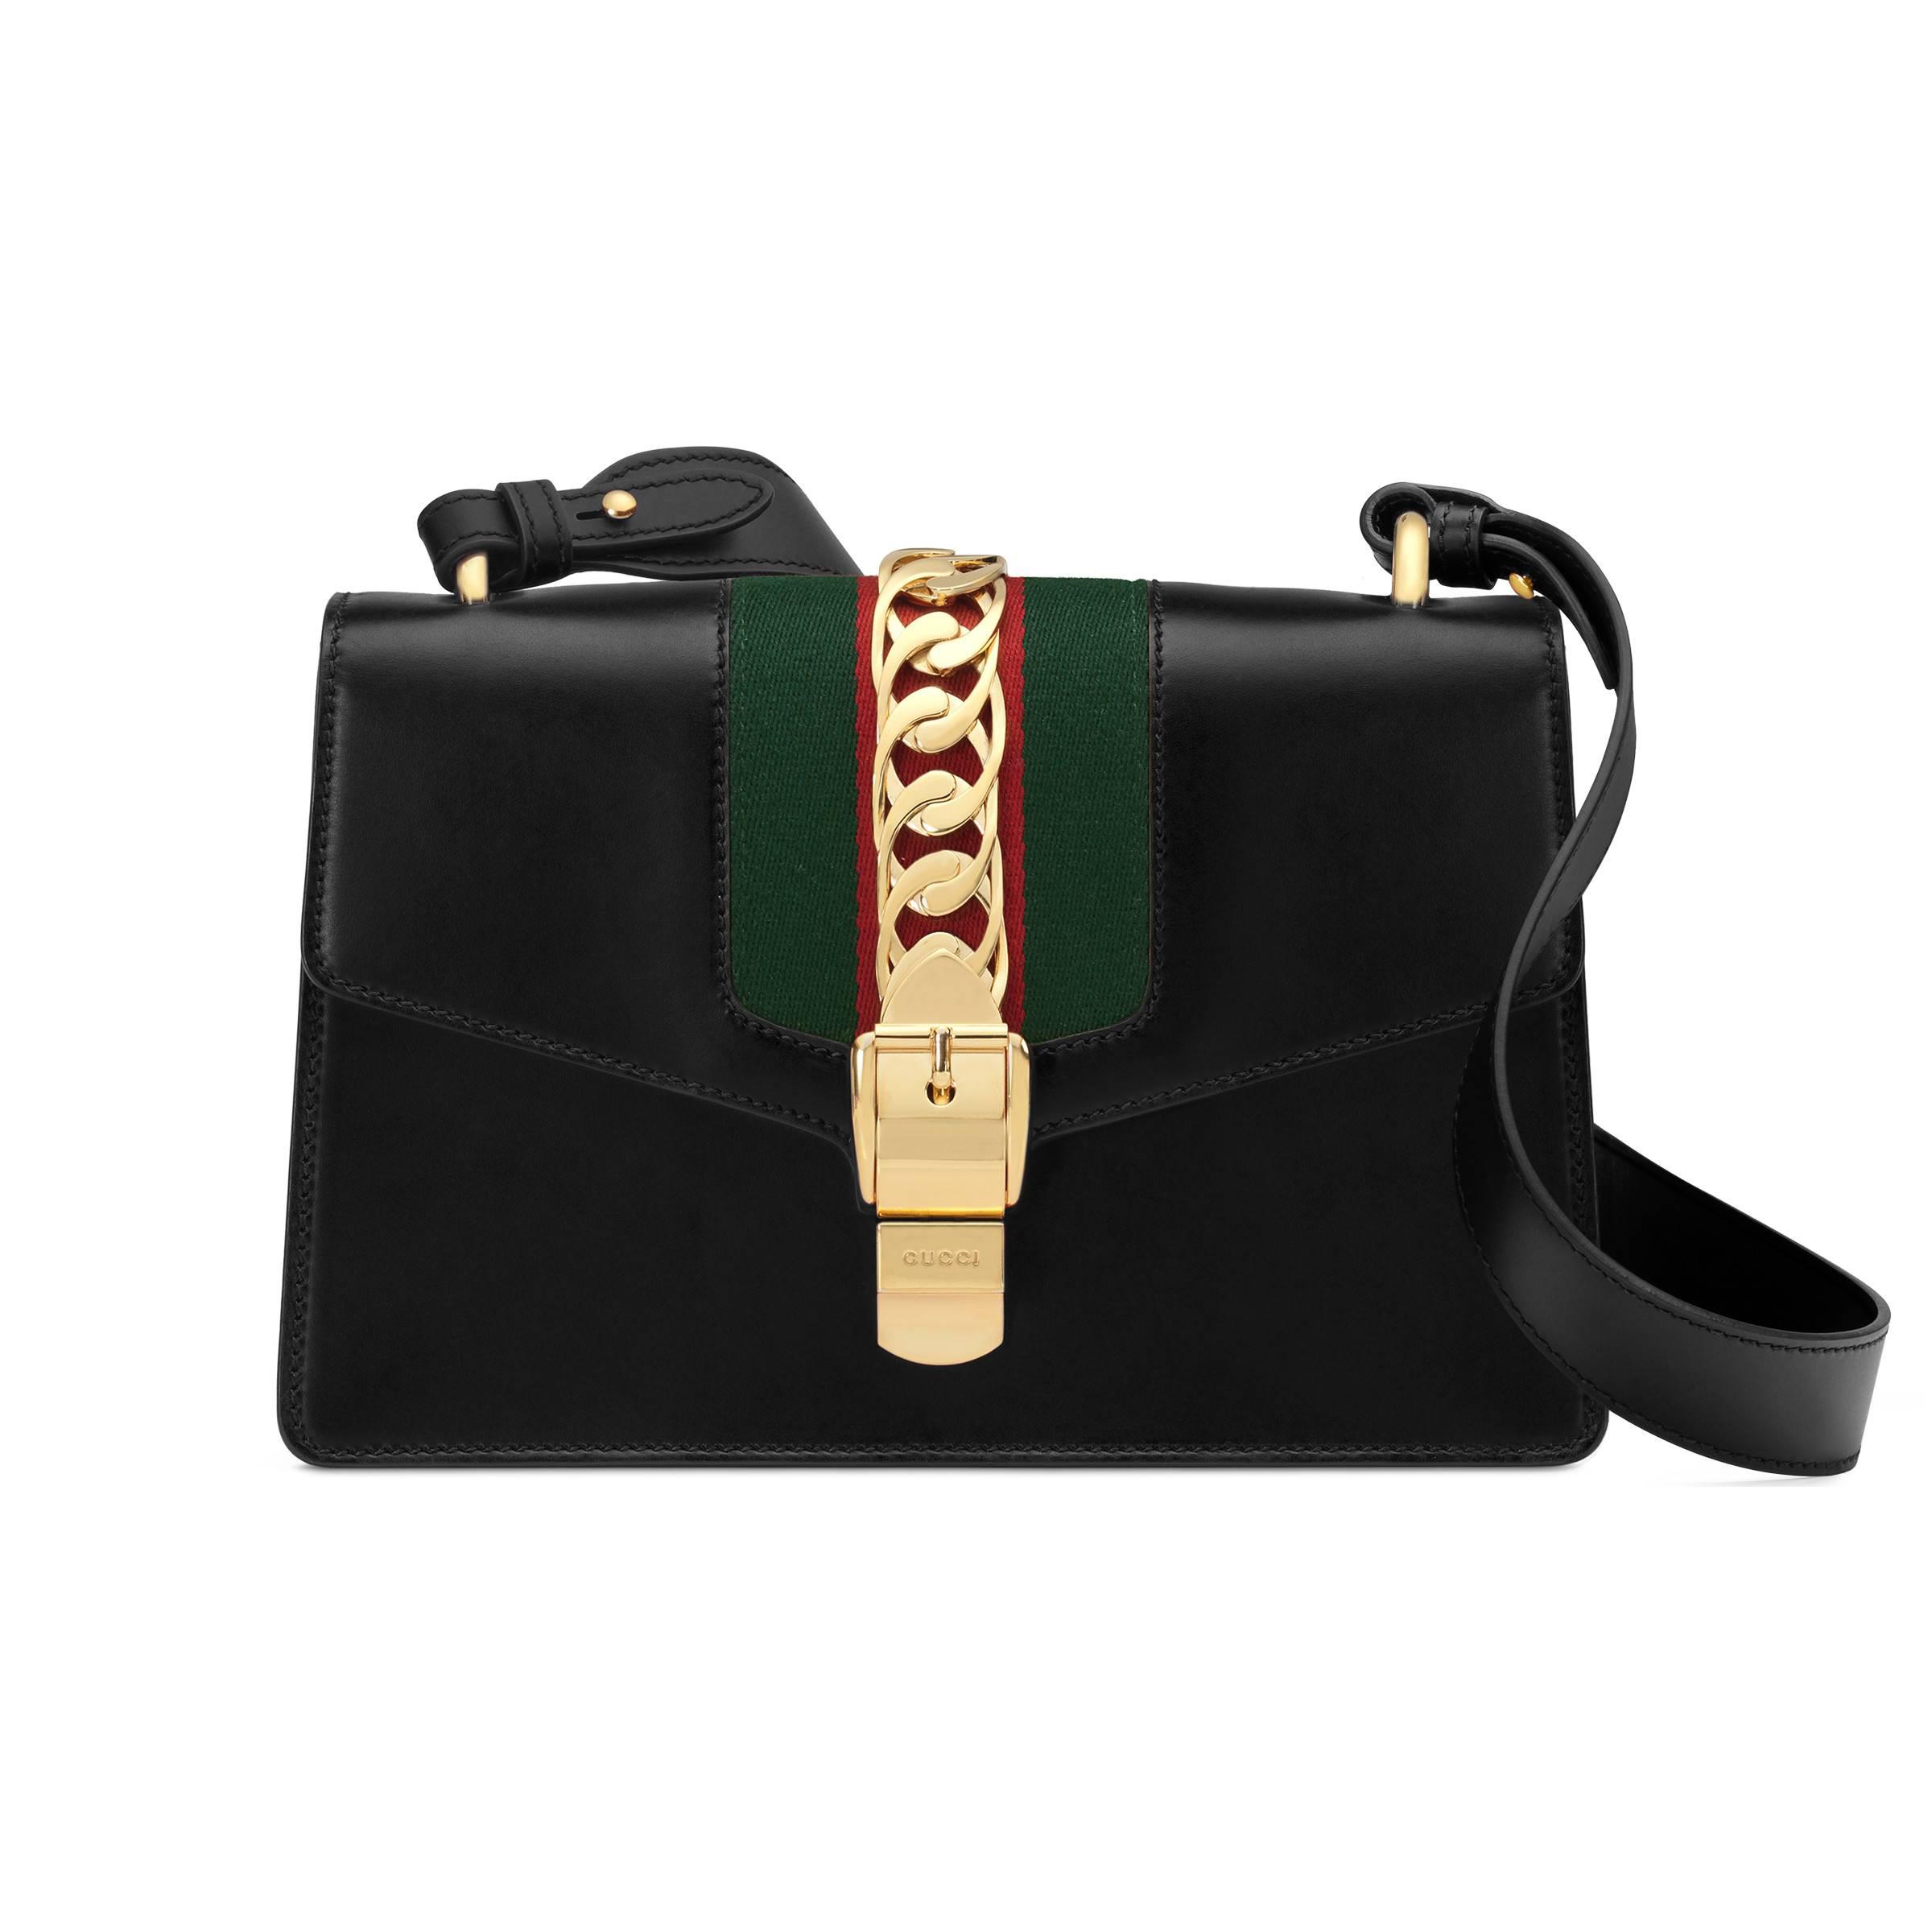 Gucci Leather Sylvie Small Shoulder Bag in Black Leather (Black) - Lyst